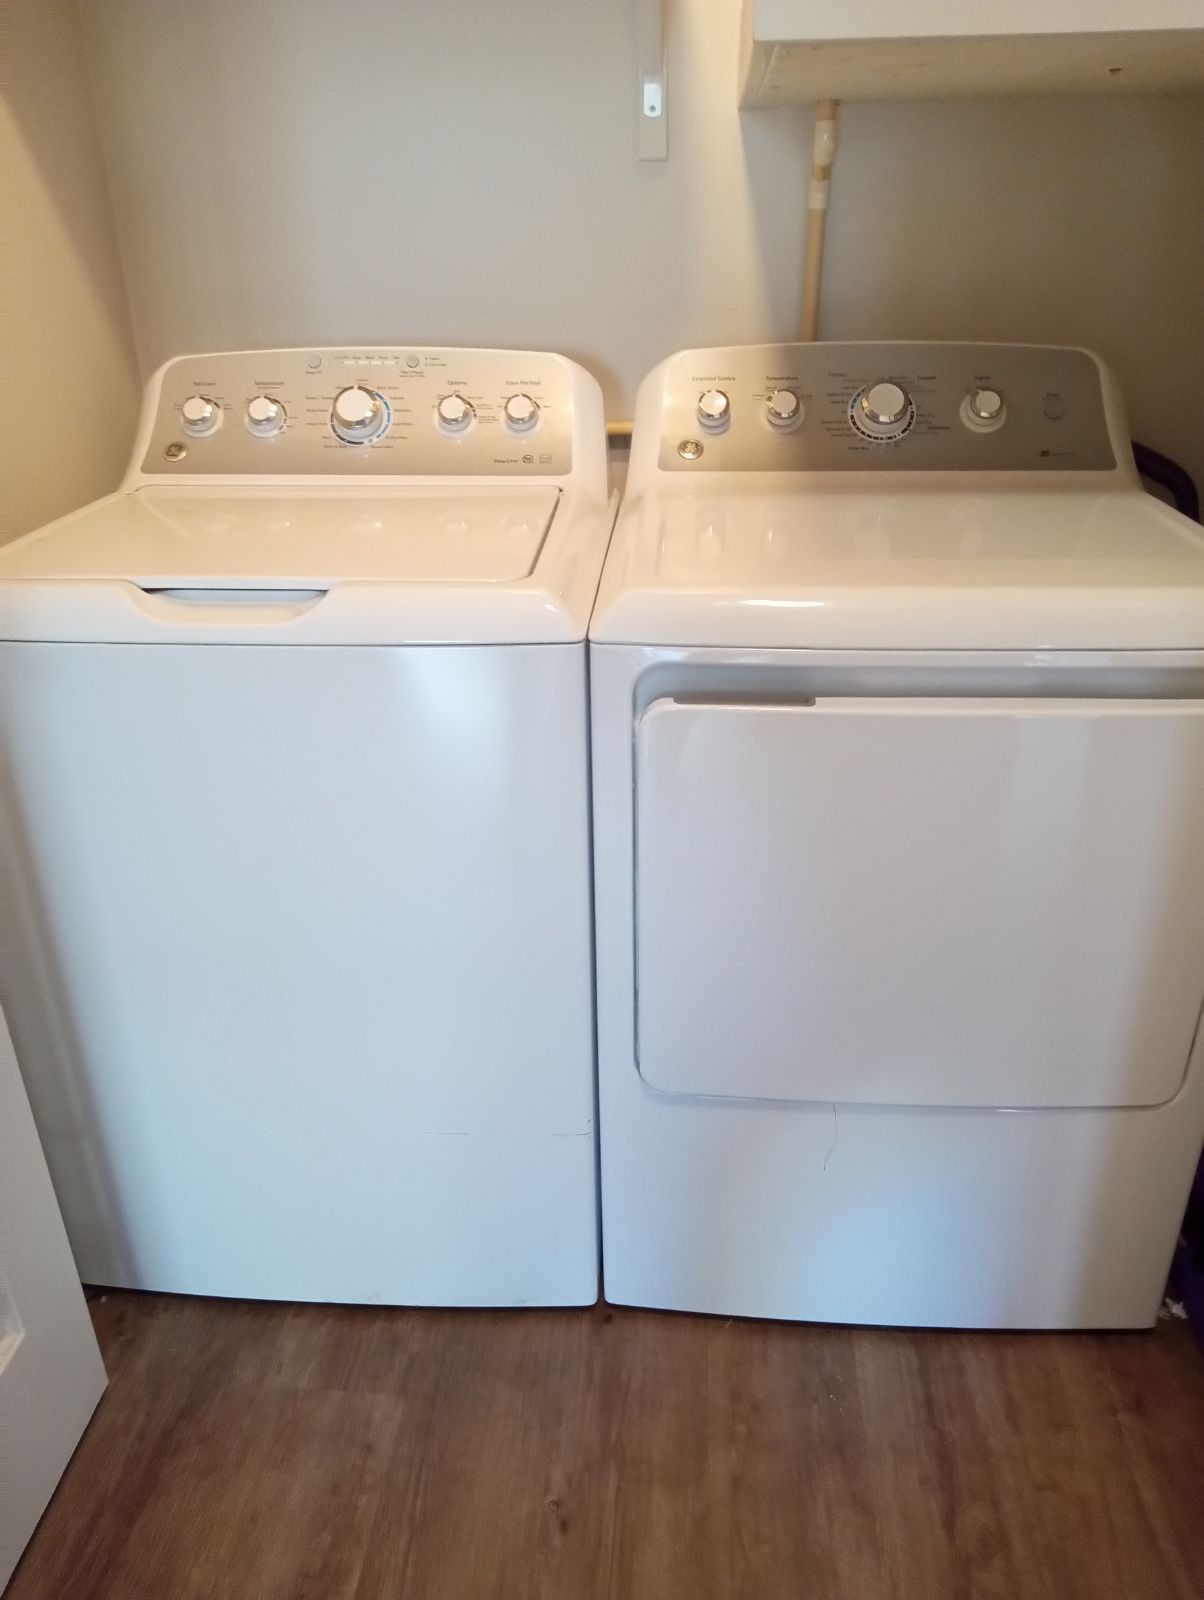 Deep Fill GE Washer & Dryer 